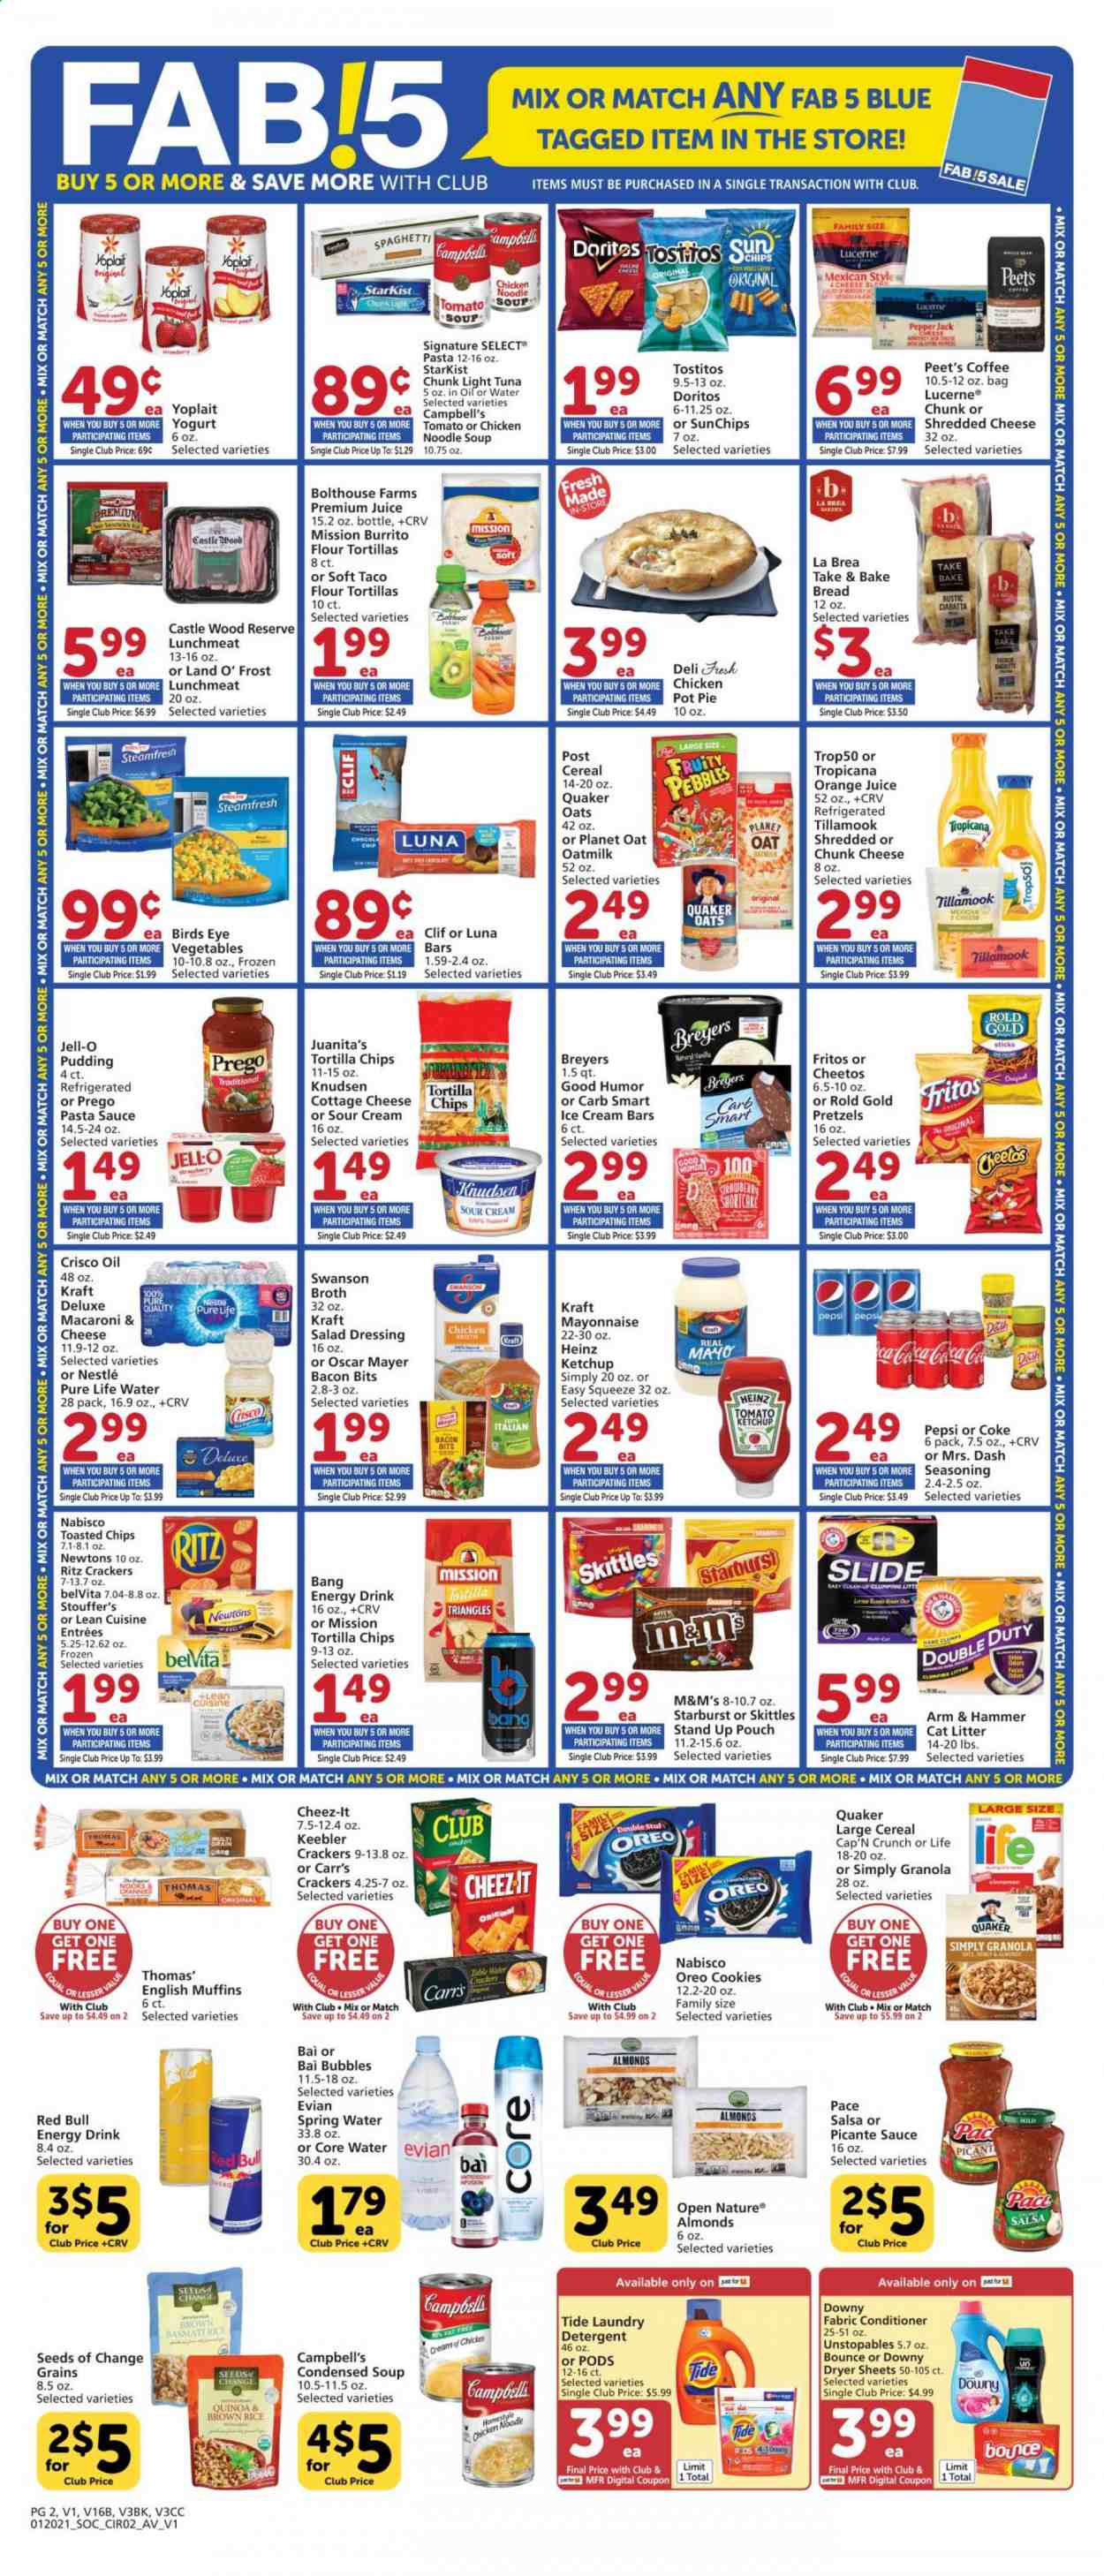 thumbnail - Albertsons Flyer - 01/20/2021 - 01/26/2021 - Sales products - bread, ciabatta, pretzels, pot pie, pie, muffin, tuna, StarKist, Campbell's, english muffins, macaroni & cheese, tomato soup, condensed soup, soup, sauce, Bird's Eye, burrito, Quaker, Lean Cuisine, Kraft®, Oscar Mayer, lunch meat, cottage cheese, shredded cheese, Pepper Jack cheese, chunk cheese, pudding, Oreo, yoghurt, Yoplait, milk, oat milk, sour cream, mayonnaise, salsa, ice cream, ice cream bars, Stouffer's, cookies, Nestlé, M&M's, crackers, Skittles, Keebler, Starburst, RITZ, Doritos, tortilla chips, Cheetos, Cheez-It, Tostitos, ARM & HAMMER, Crisco, oats, Jell-O, broth, bacon bits, Heinz, light tuna, cereals, Fritos, granola, Cap'n Crunch, Fruity Pebbles, belVita, basmati rice, brown rice, quinoa, rice, spaghetti, noodles, salad dressing, ketchup, pasta sauce, dressing, almonds, Coca-Cola, Pepsi, orange juice, juice, energy drink, Red Bull, Bai, spring water, Pure Life Water, coffee, Castle, detergent, Tide, Unstopables, laundry detergent, Bounce, dryer sheets, conditioner, pot, cat litter. Page 2.